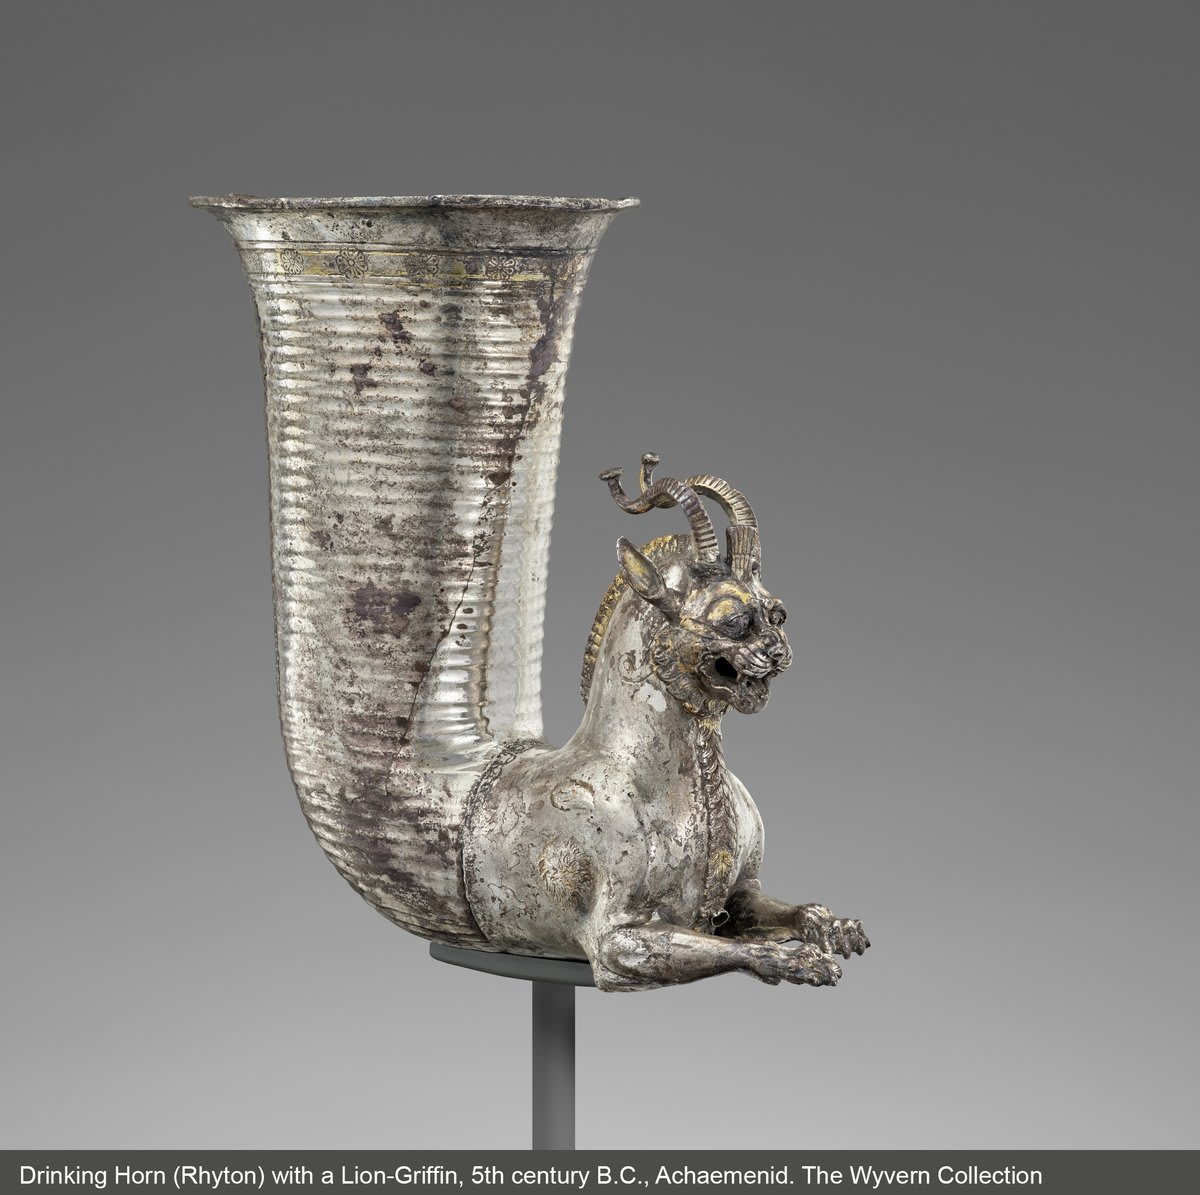 Royal Persian banquet? Think fine dining with luxurious items! The kings of Achaemenid Persia (550-330 BC) drank from ornate gold and silver vessels at their banquets. These valuable objects also served as symbols of their power and status.